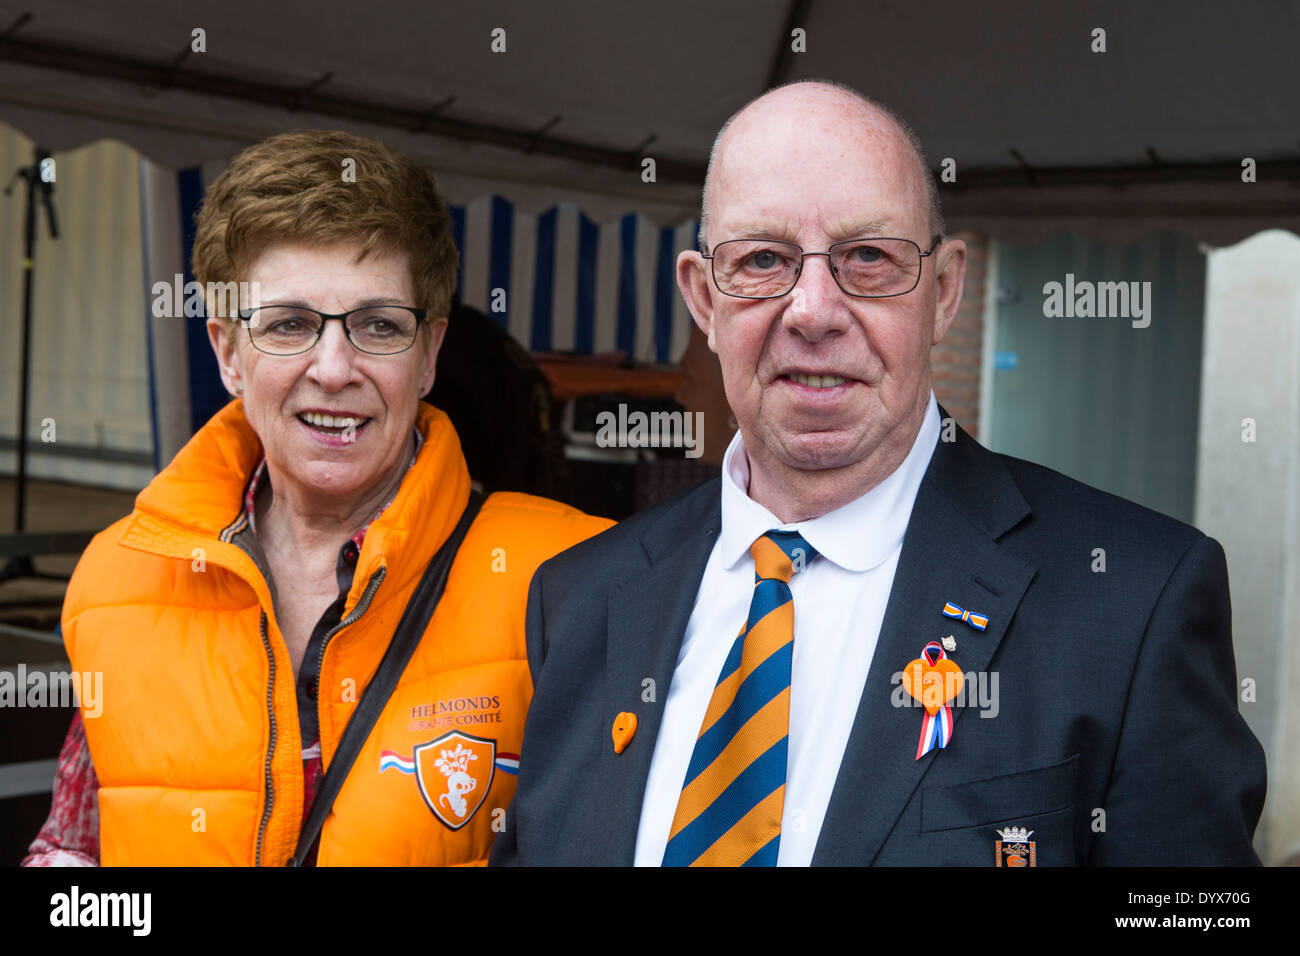 Two people at King's day in Helmond, the Netherlands Stock Photo